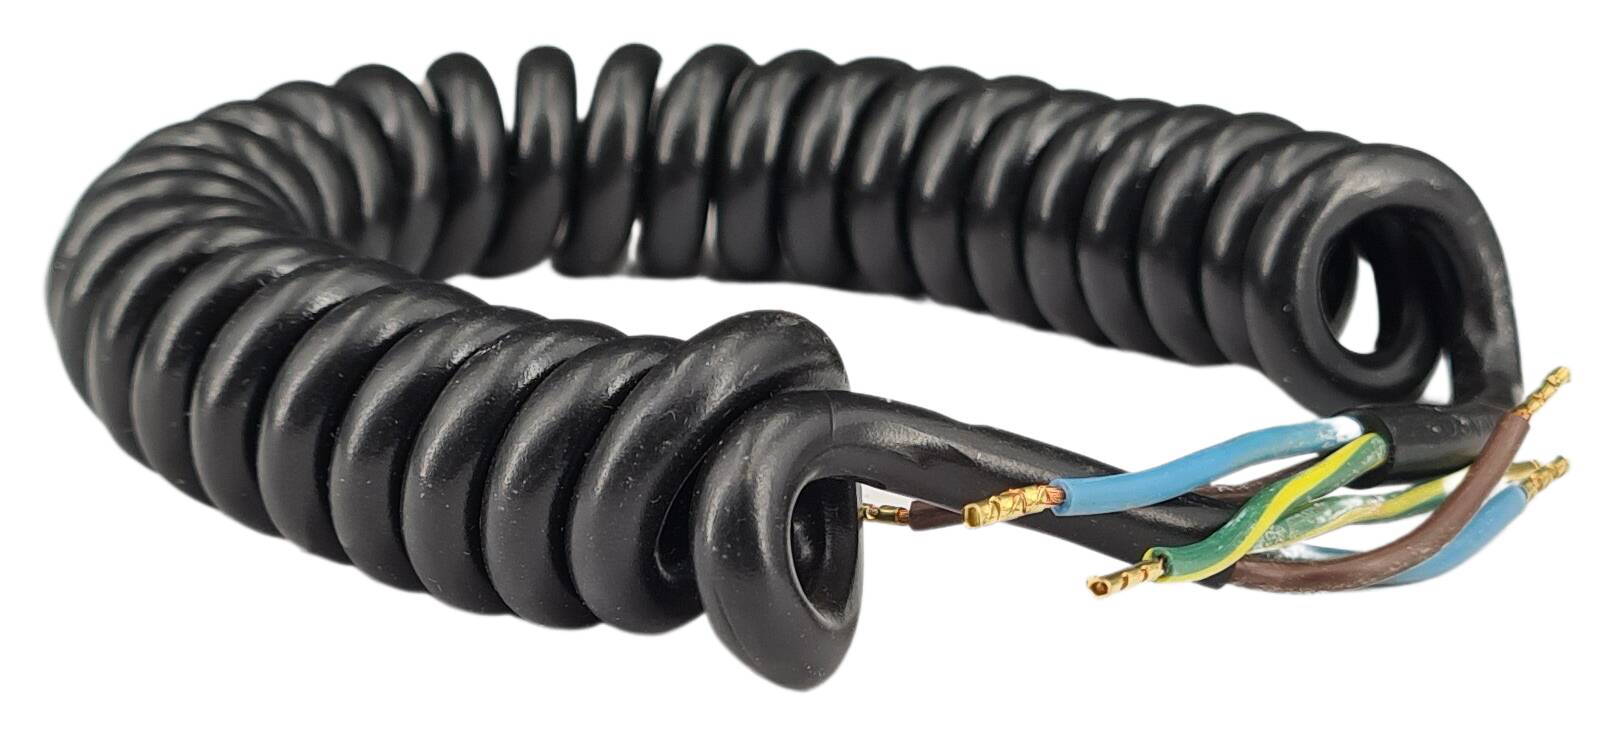 spiral cable-section 3G 0,75 extensible length 1200 mm free end 30/7 AE black